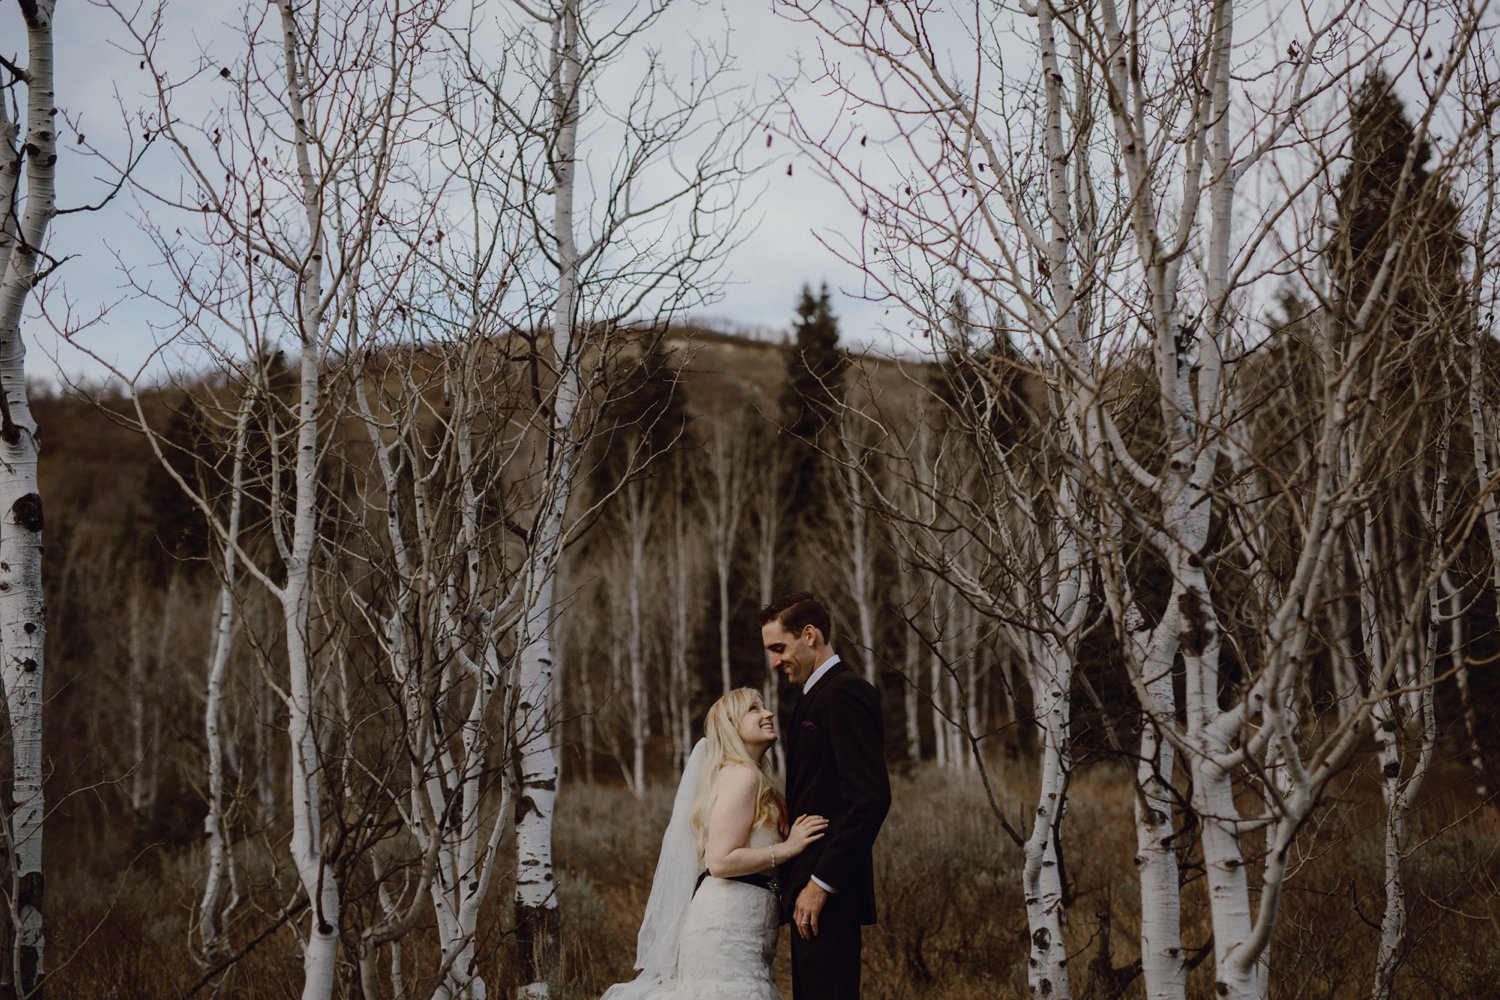 A wedding photo with Aspen trees